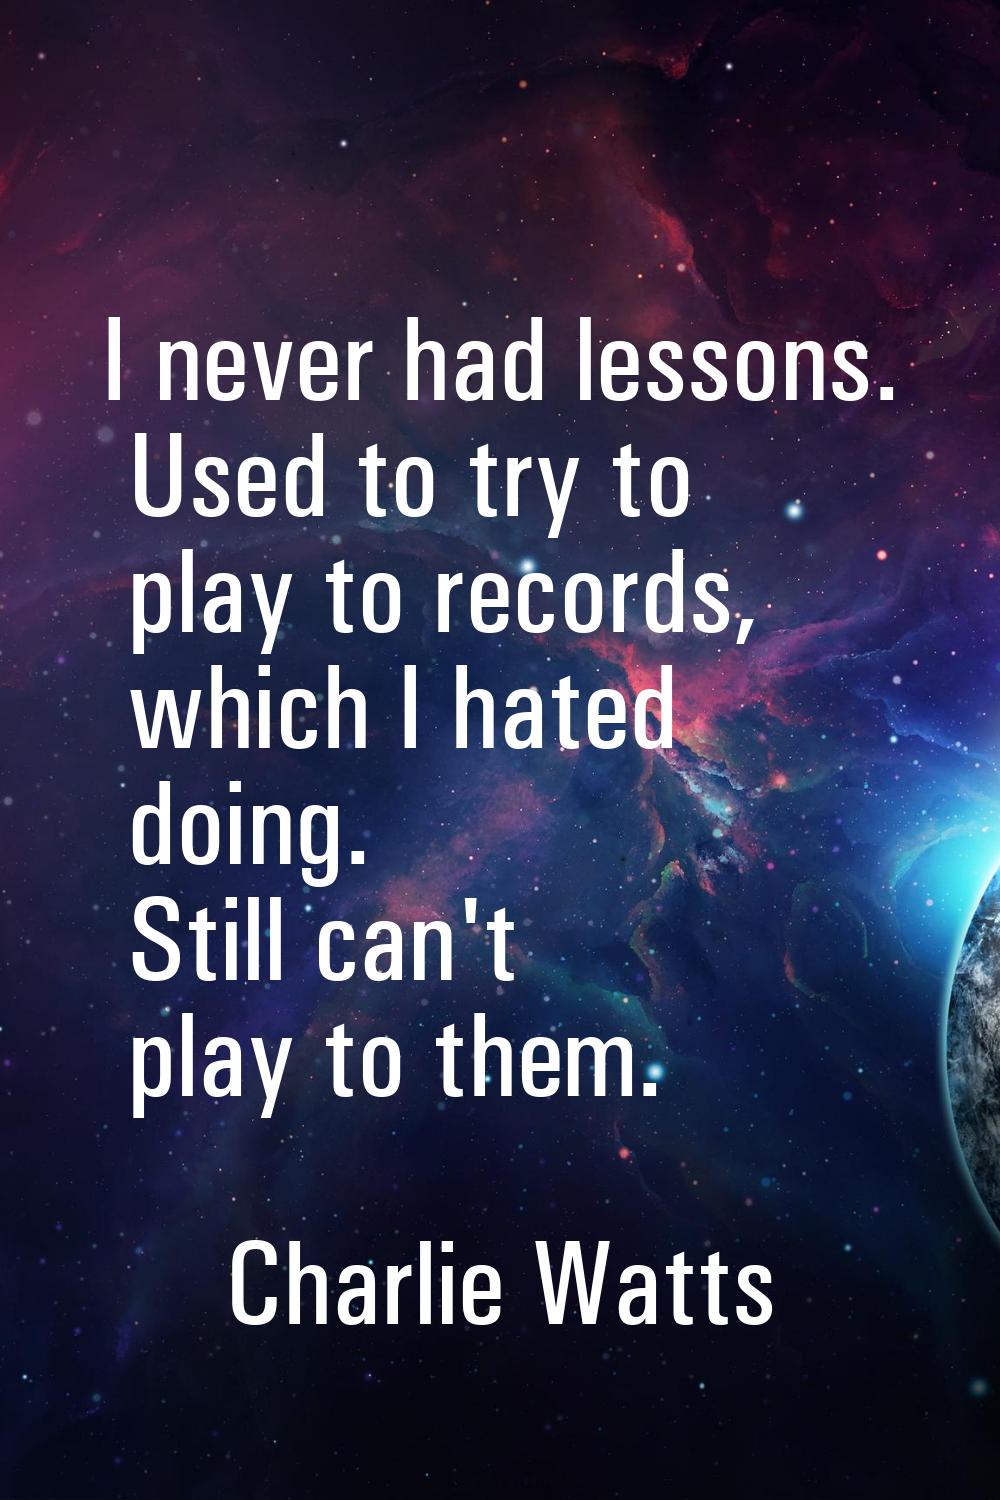 I never had lessons. Used to try to play to records, which I hated doing. Still can't play to them.